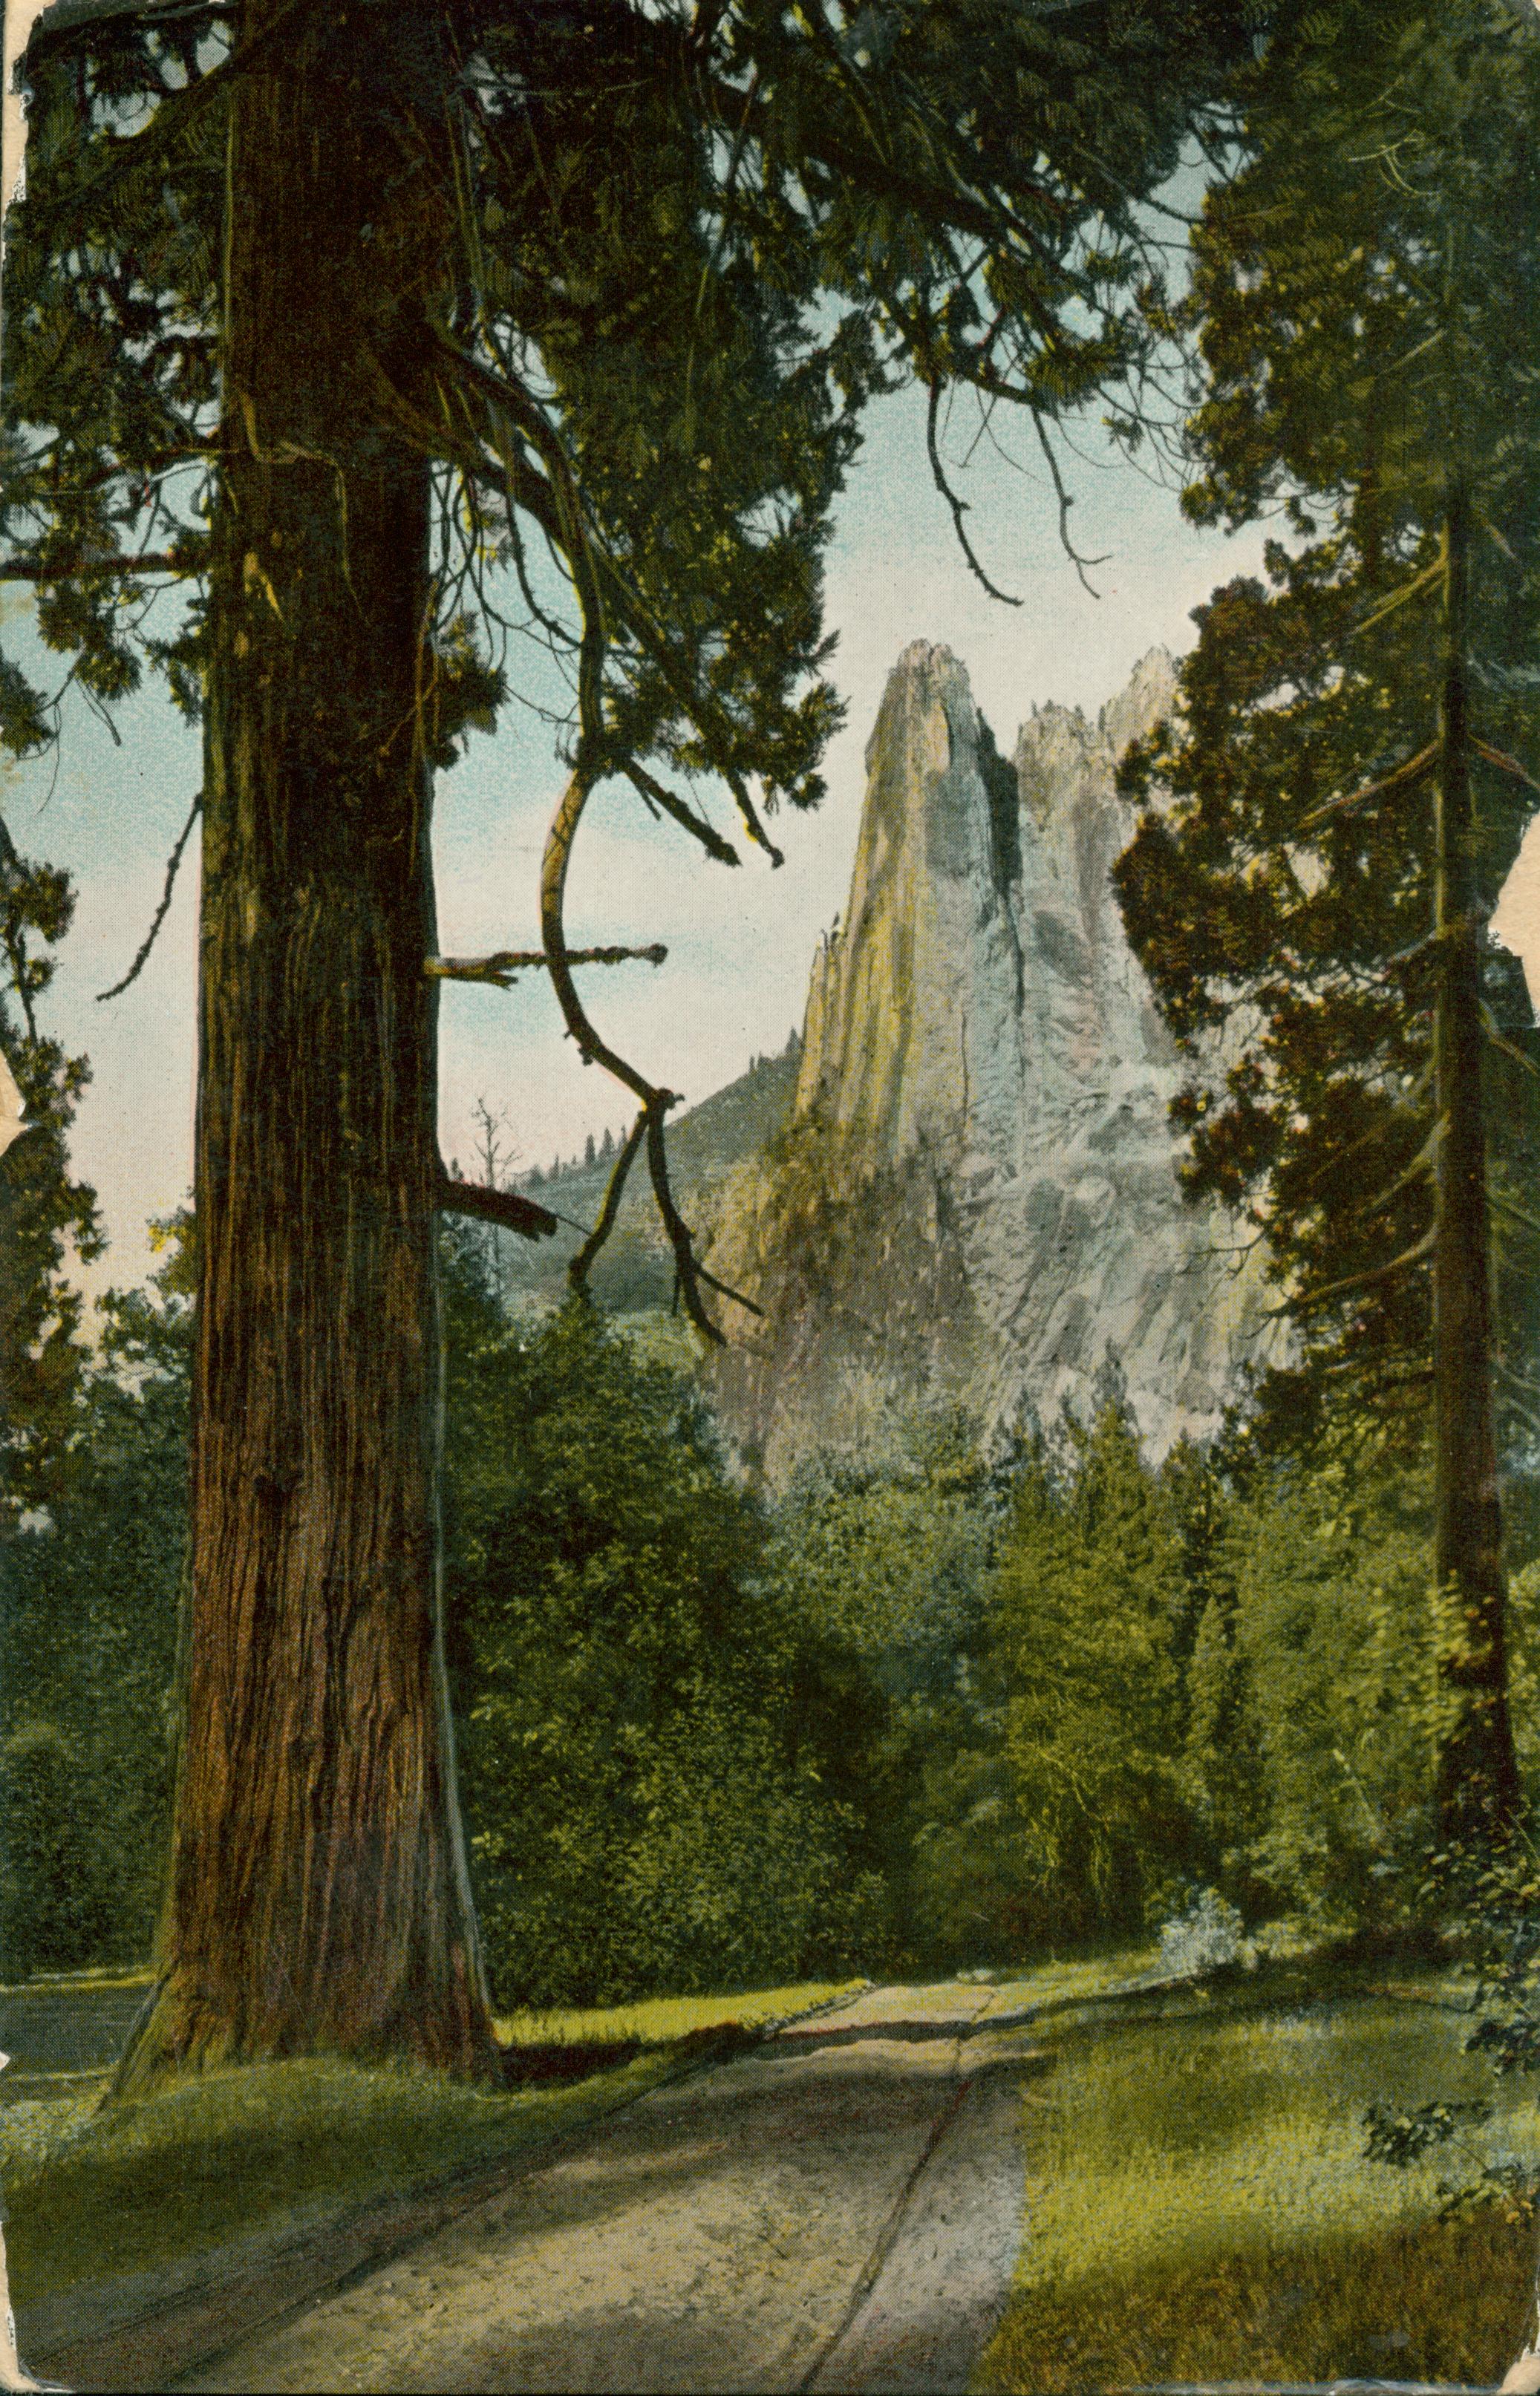 Shows a dirt road winding into the trees with Sentinel Rock in the background